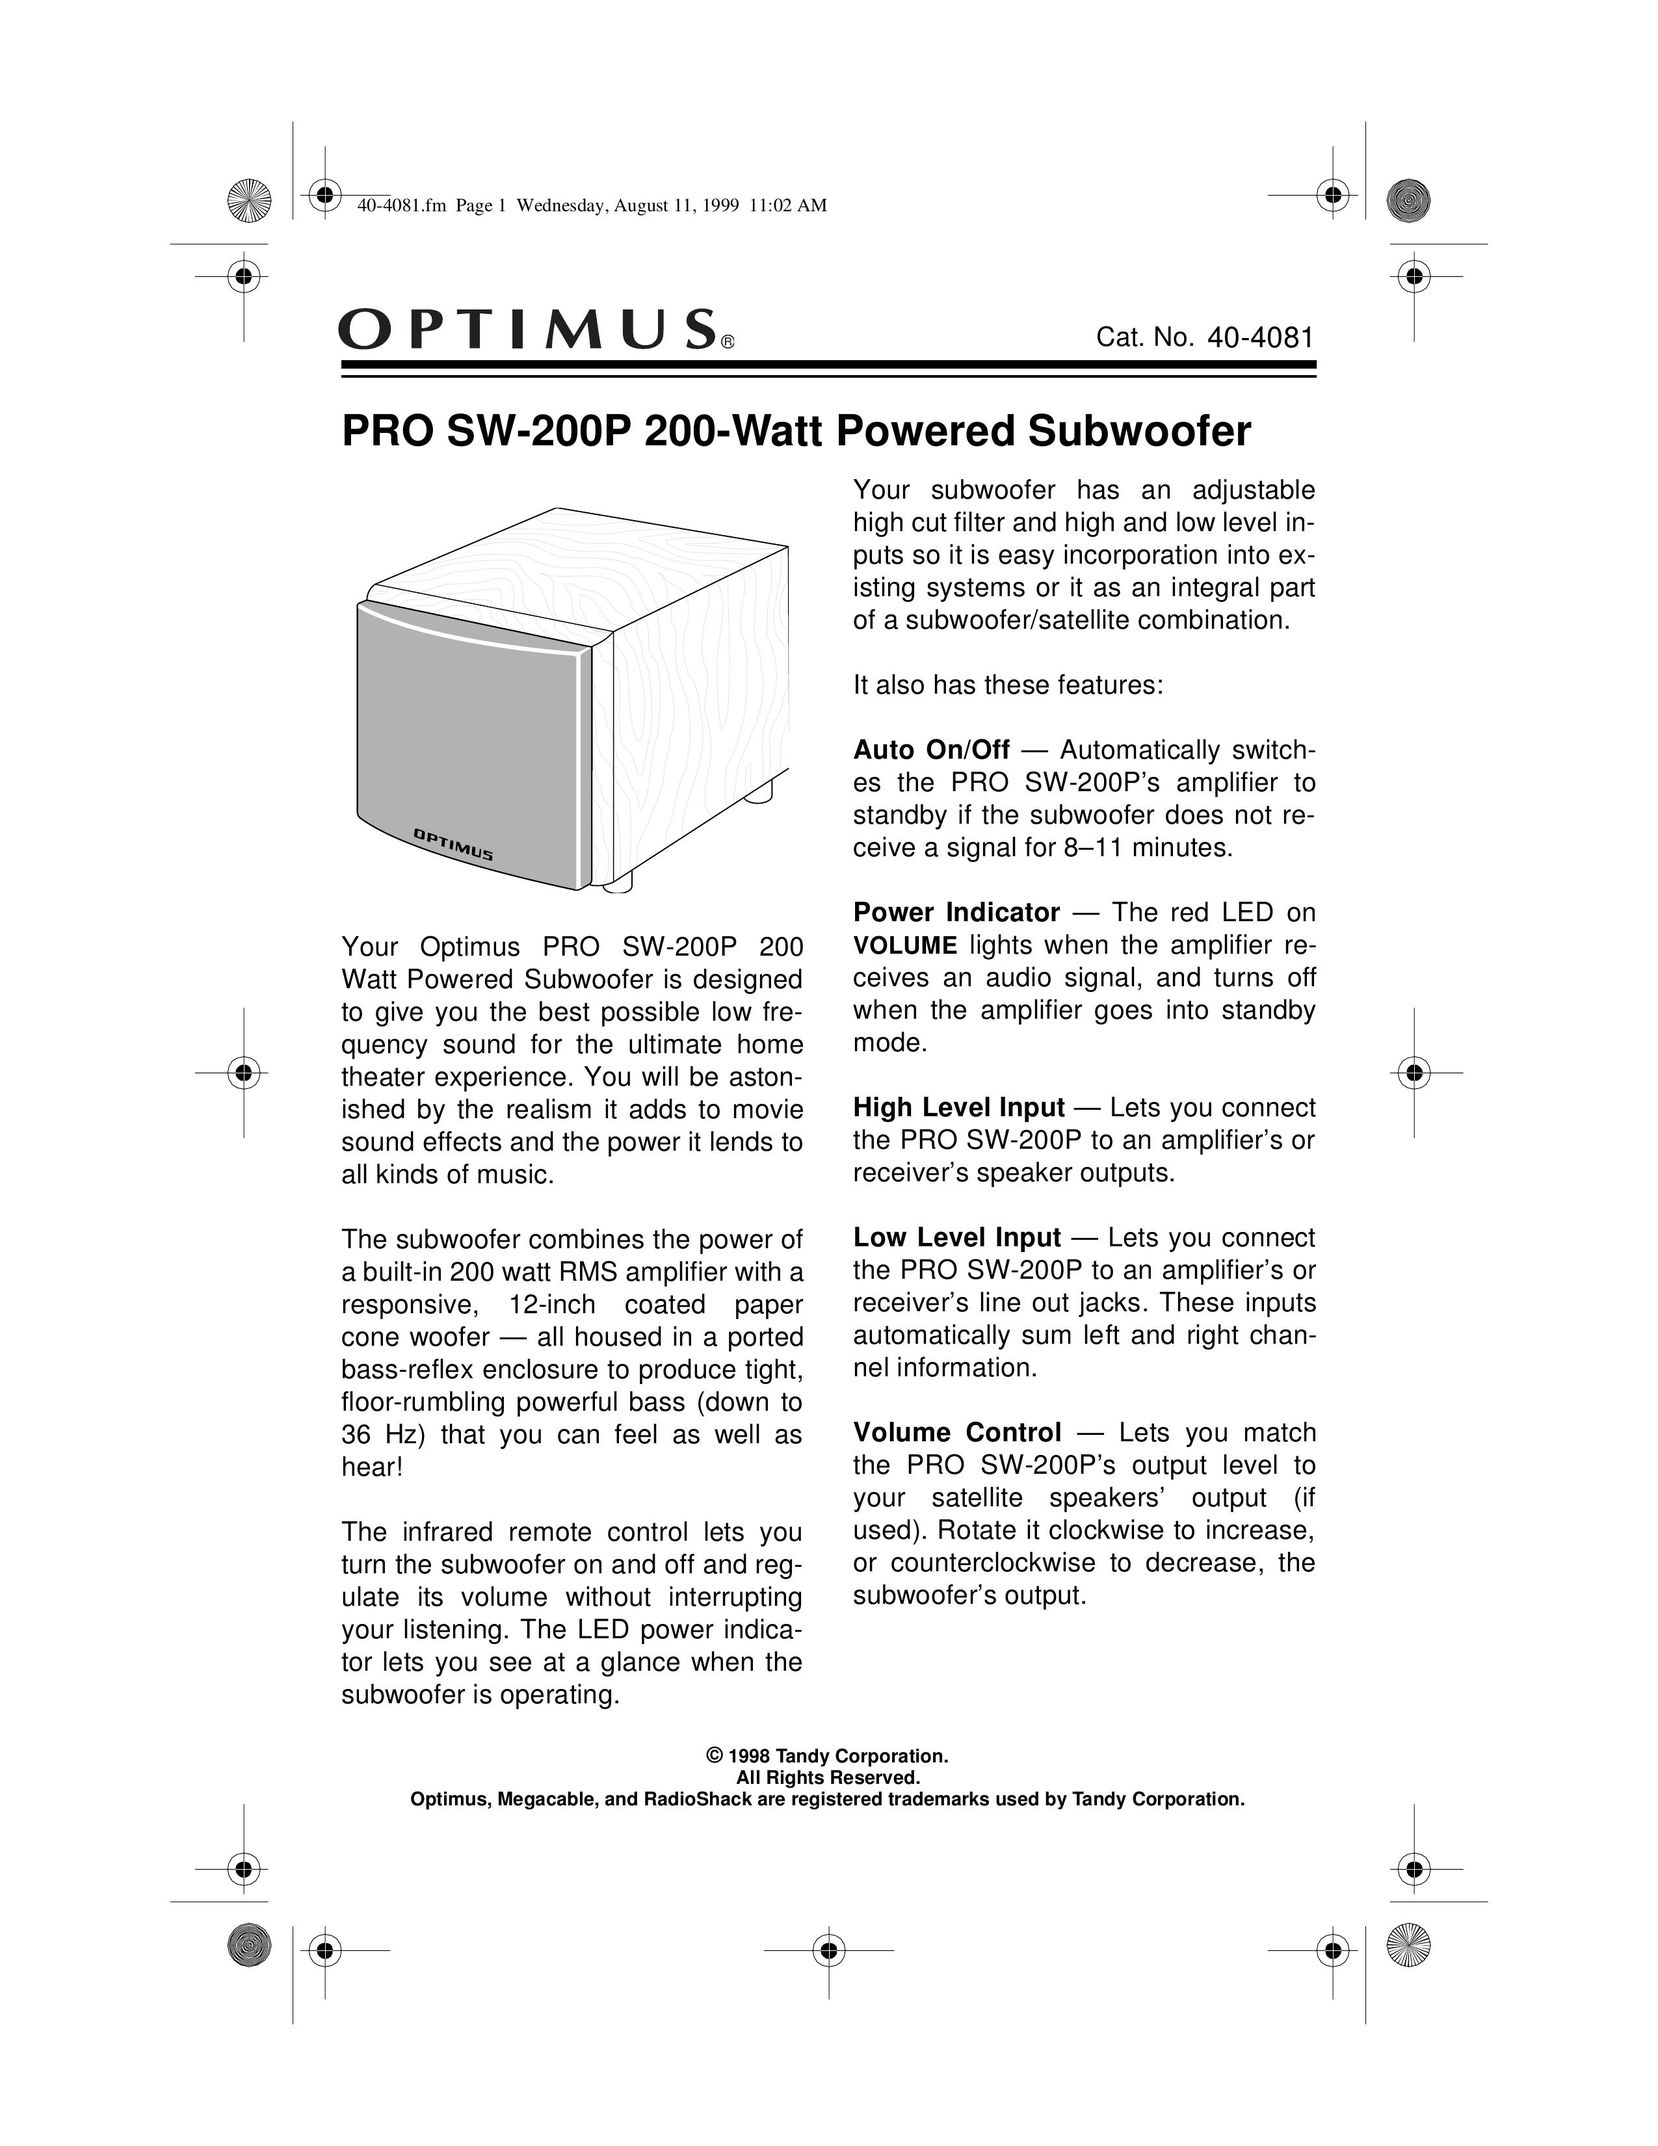 Optimus PRO SW-200P Home Theater System User Manual